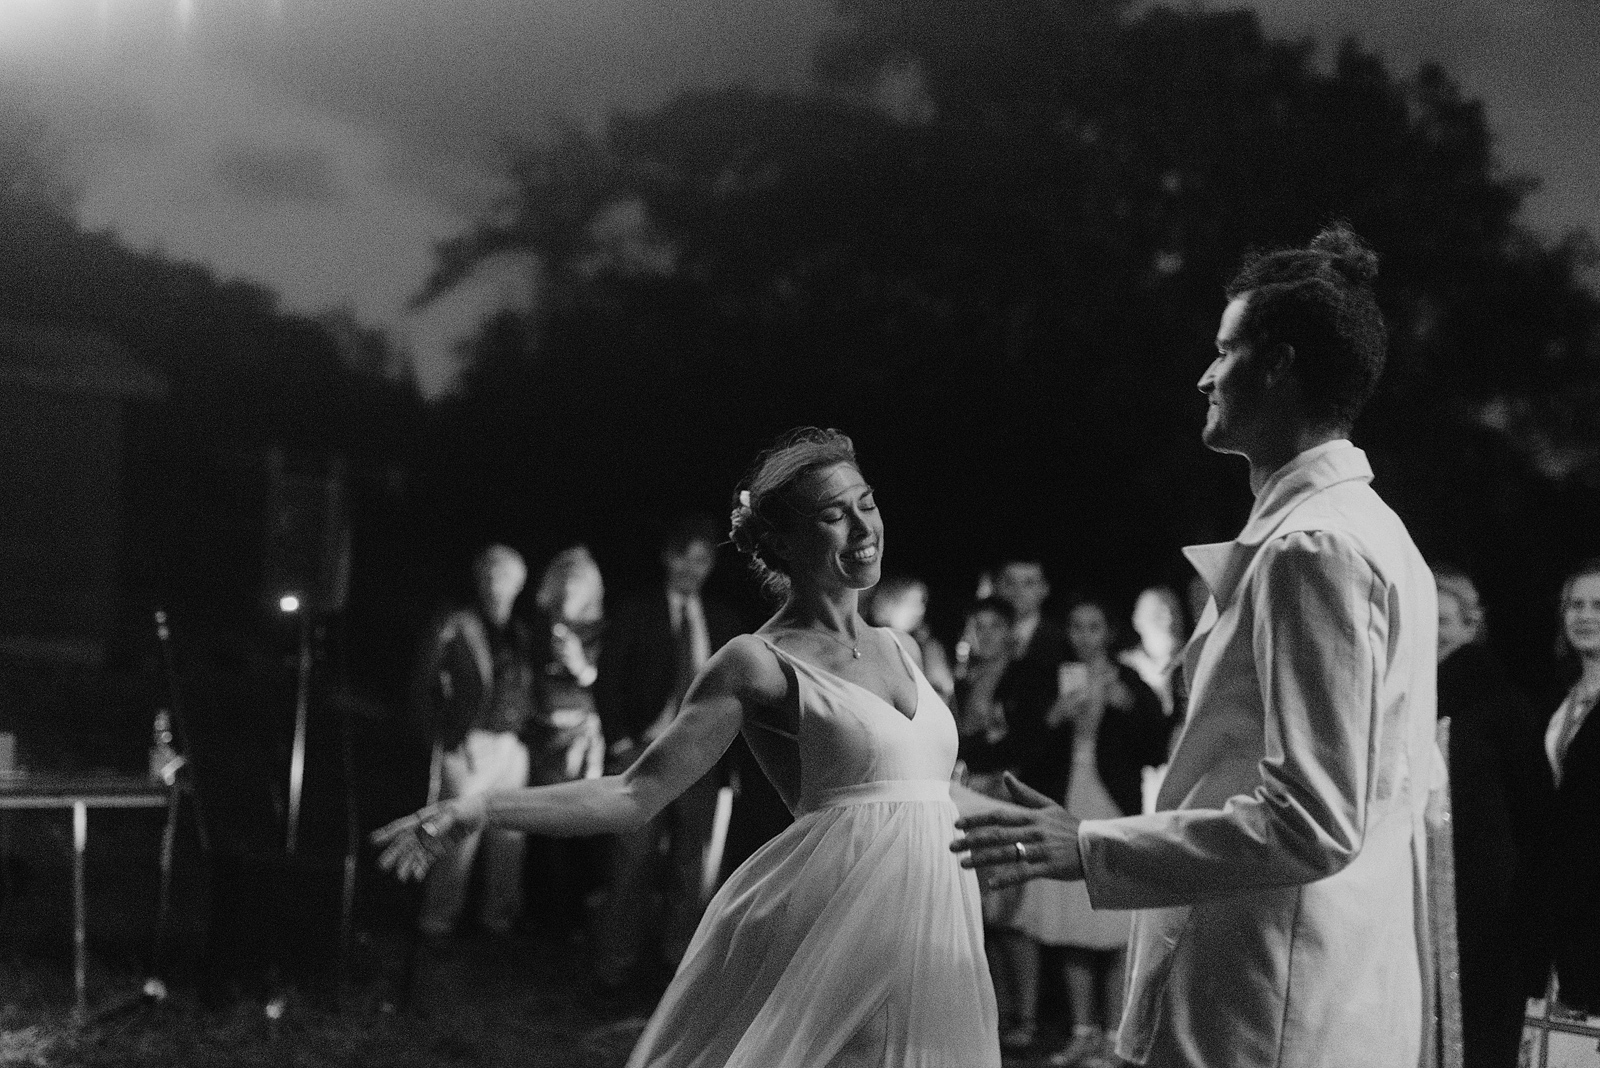 Black and white portrait of bride dancing towards the groom - Columbia Gorge River Wedding Reception